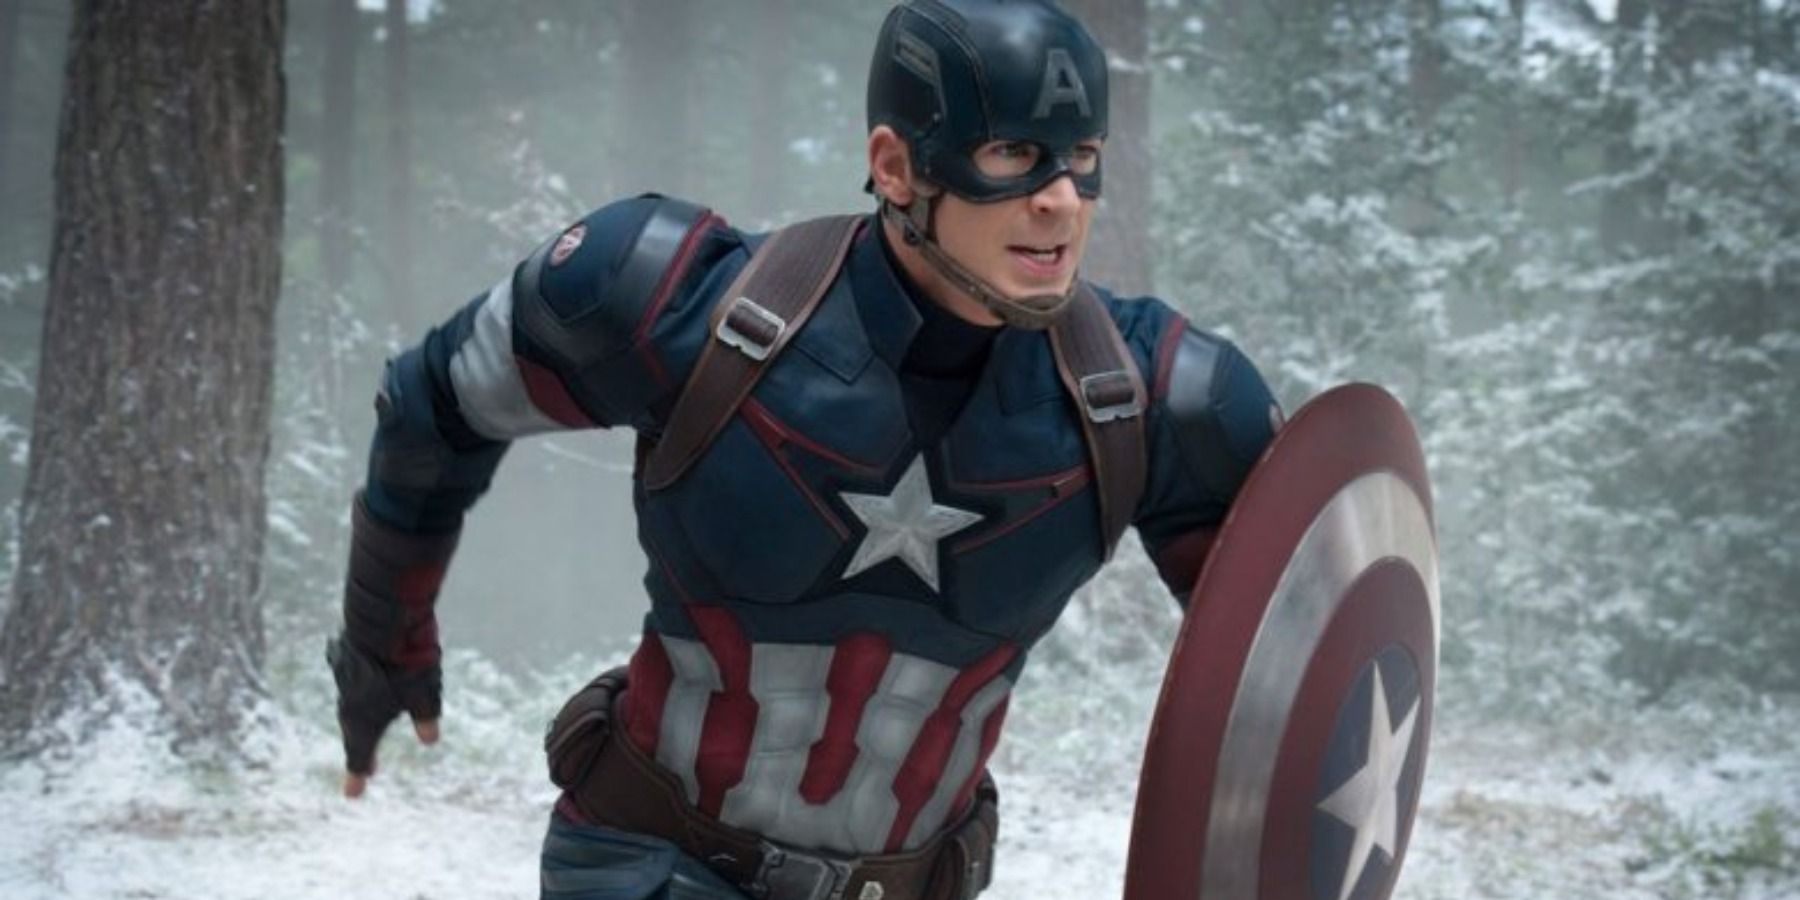 Marvel Captain America with his shield